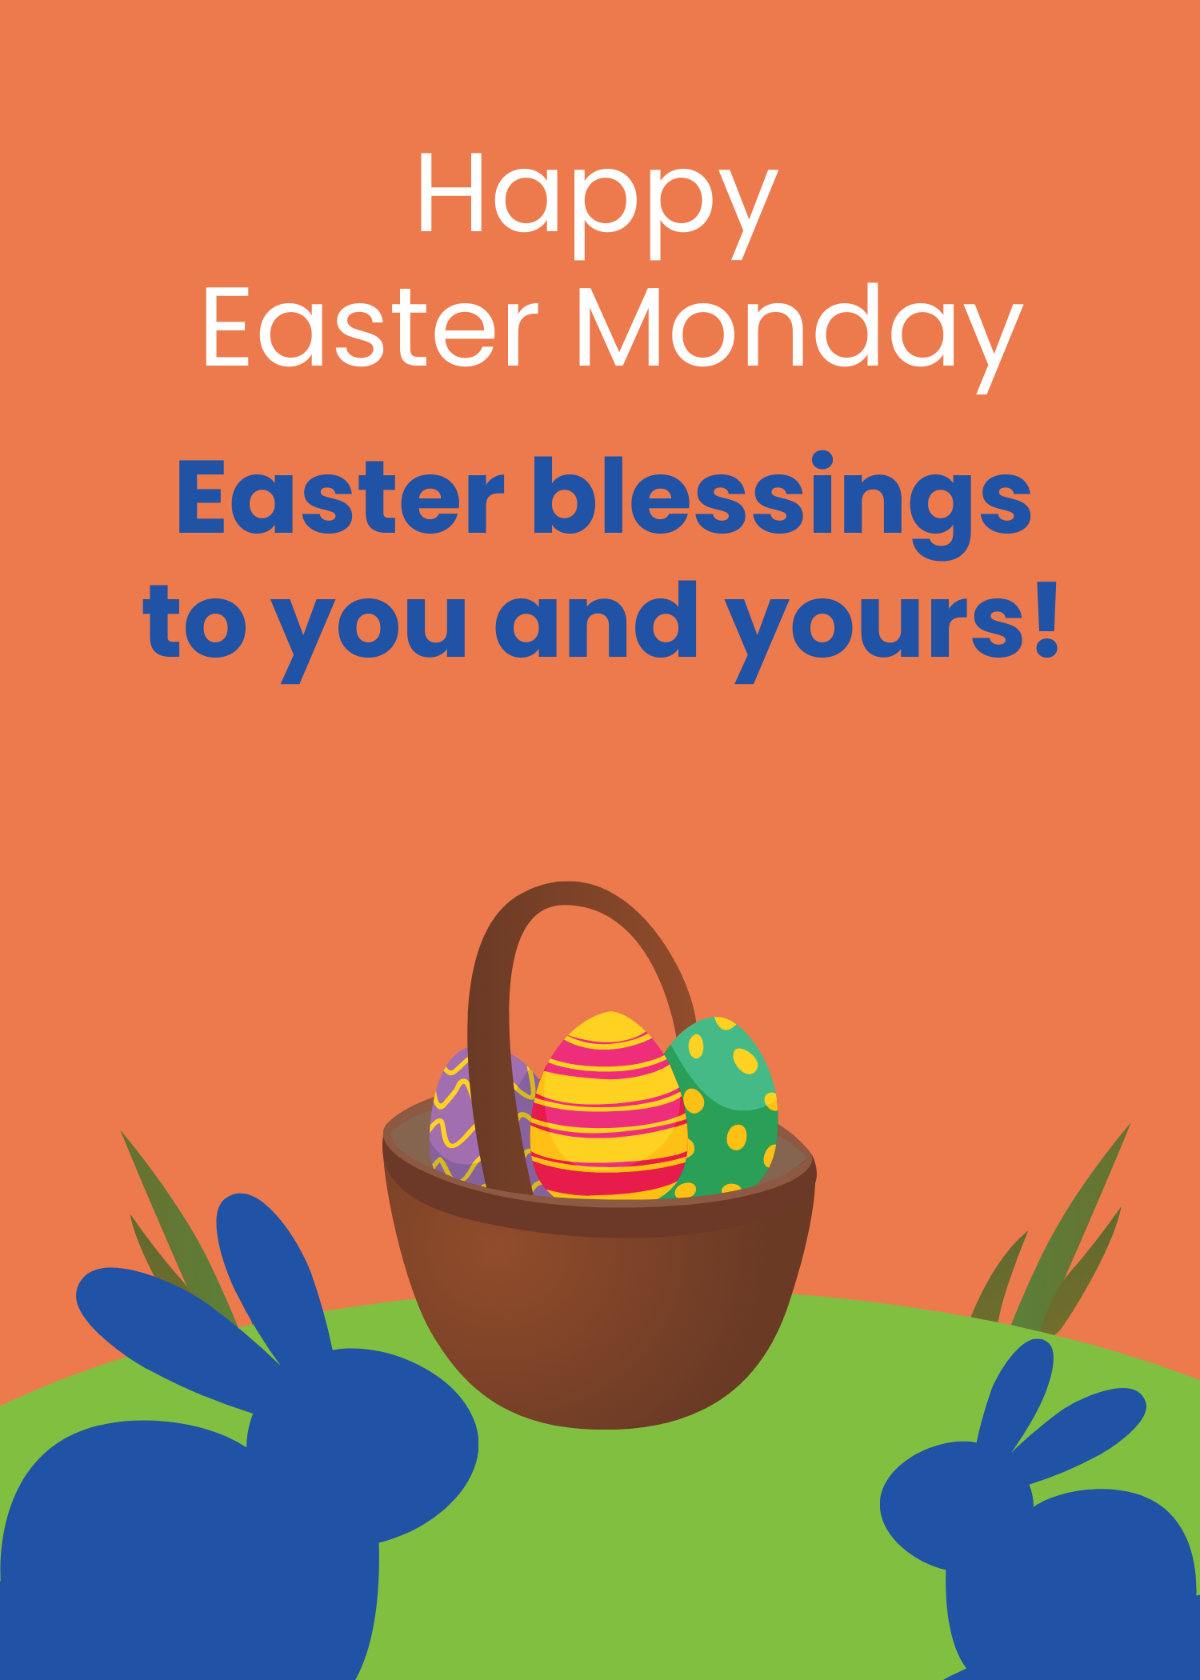 Easter Monday Greeting Card Template